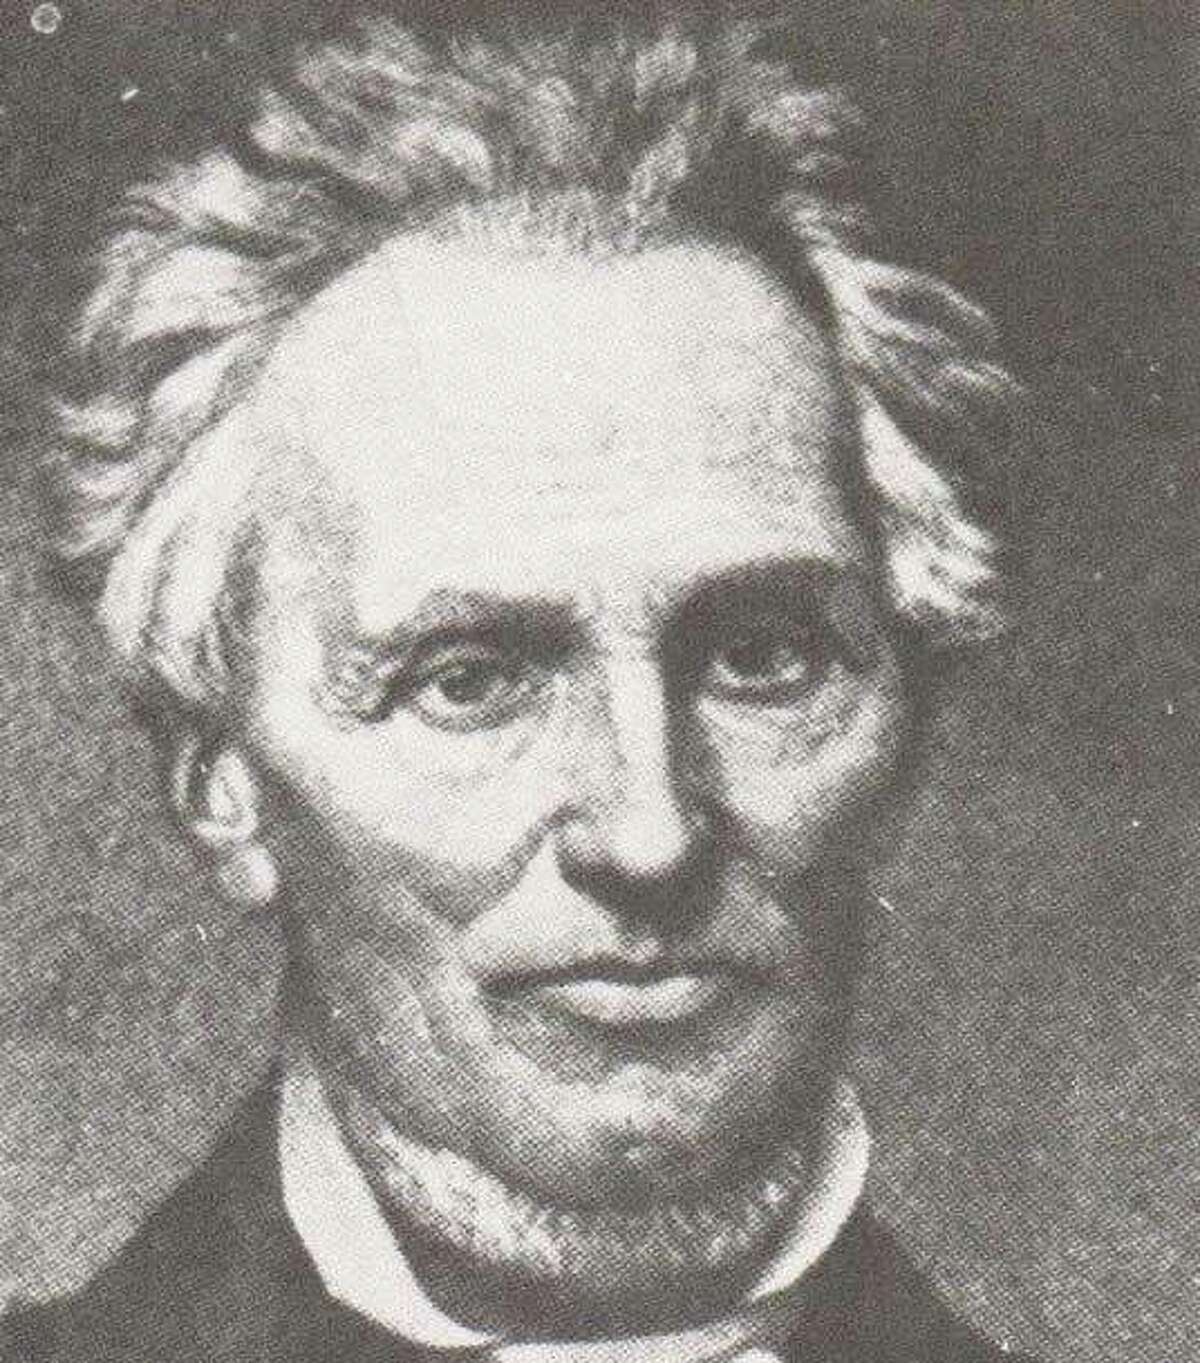 Reverend John Mason Peck, D.D., first arrived in Alton in 1817 via Smeltzer’s Ferry from St. Louis. Peck came from New England, sent by the Baptist Triennial Convention as a missionary to the Mississippi territory. In 1826, convinced of the need for a theological school in Illinois, he established a school at Rock Springs (near Belleville) in 1827 with twenty-five students. Upper Alton proponents of the college encouraged Peck to move the seminary there. This was accomplished in 1832. Peck is considered the pioneer of religious journalism in Illinois. In addition to a religious newspaper, he published Peck’s Gazetteer for Emigrants in 1834, providing information on the land, climate, towns, and settlements for prospective settlers. Peck wrote prolifically on the slavery issue in Illinois, and met with Rev. Elijah P. Lovejoy in Alton in forming the Illinois Anti-Slavery Society.